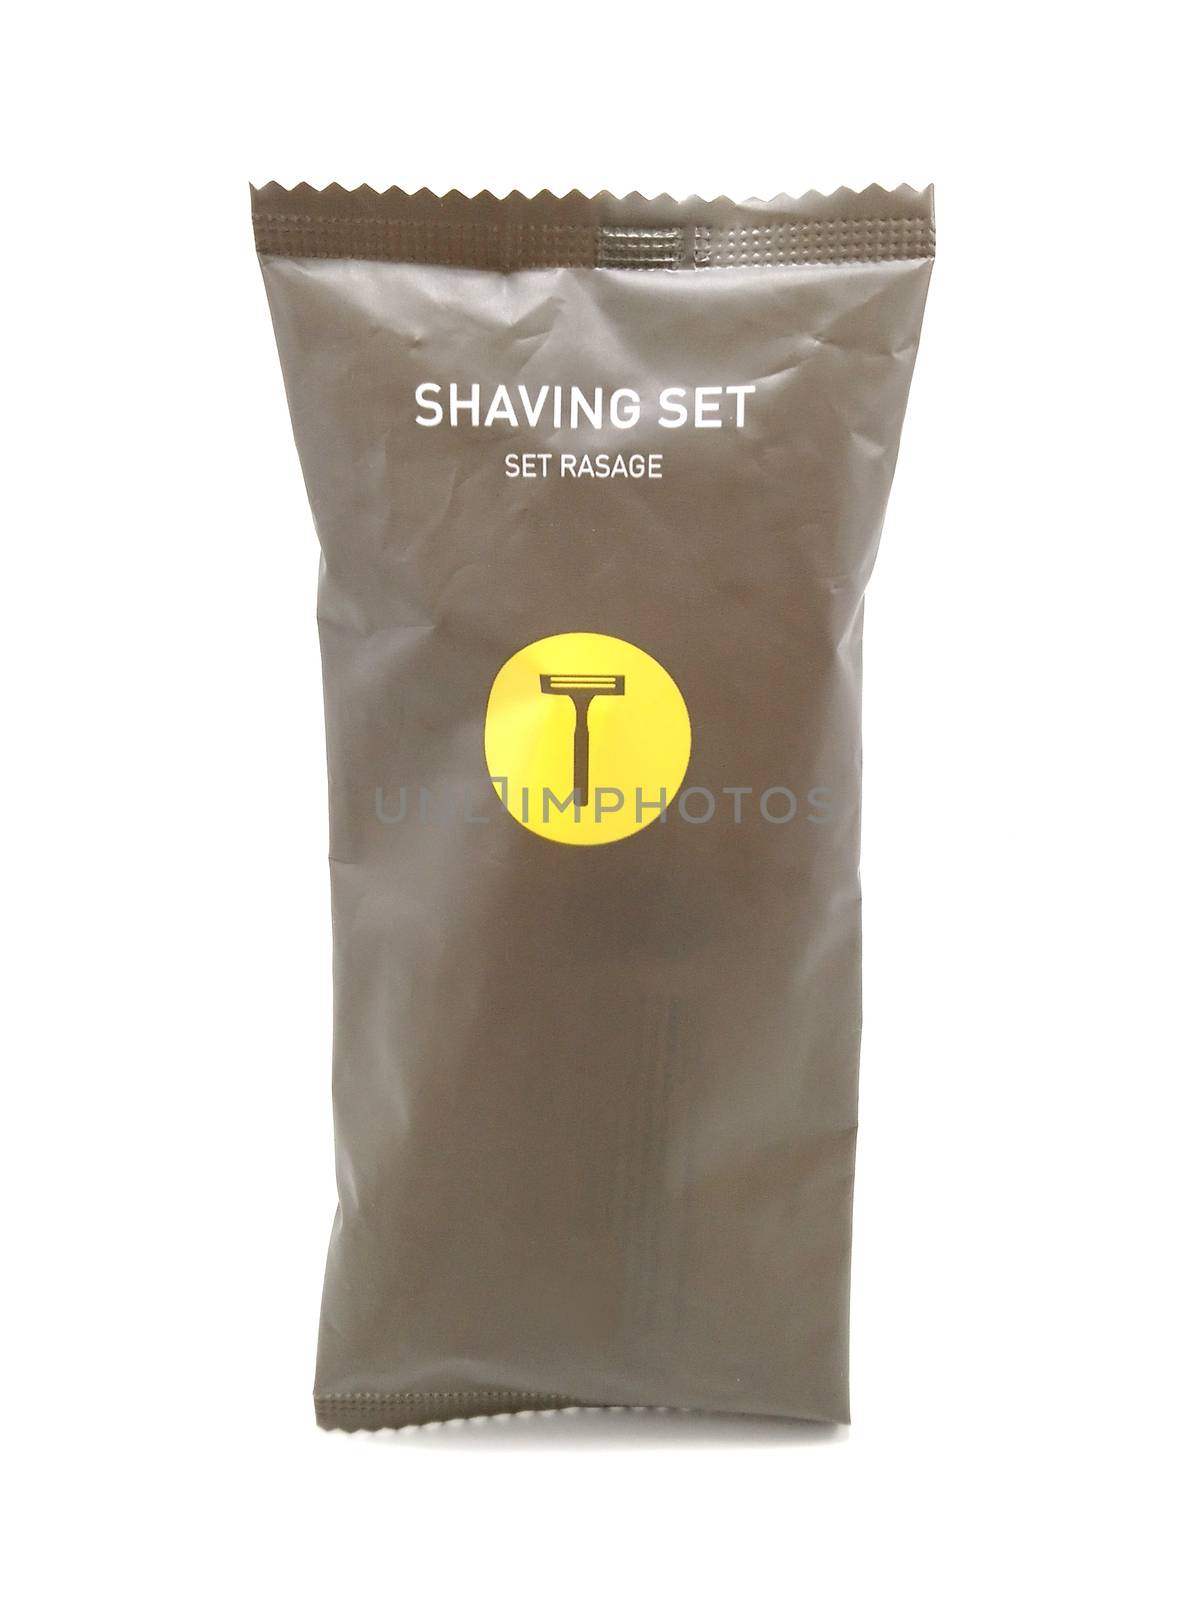 Shaving set small pack hotel complimentary toiletries by imwaltersy